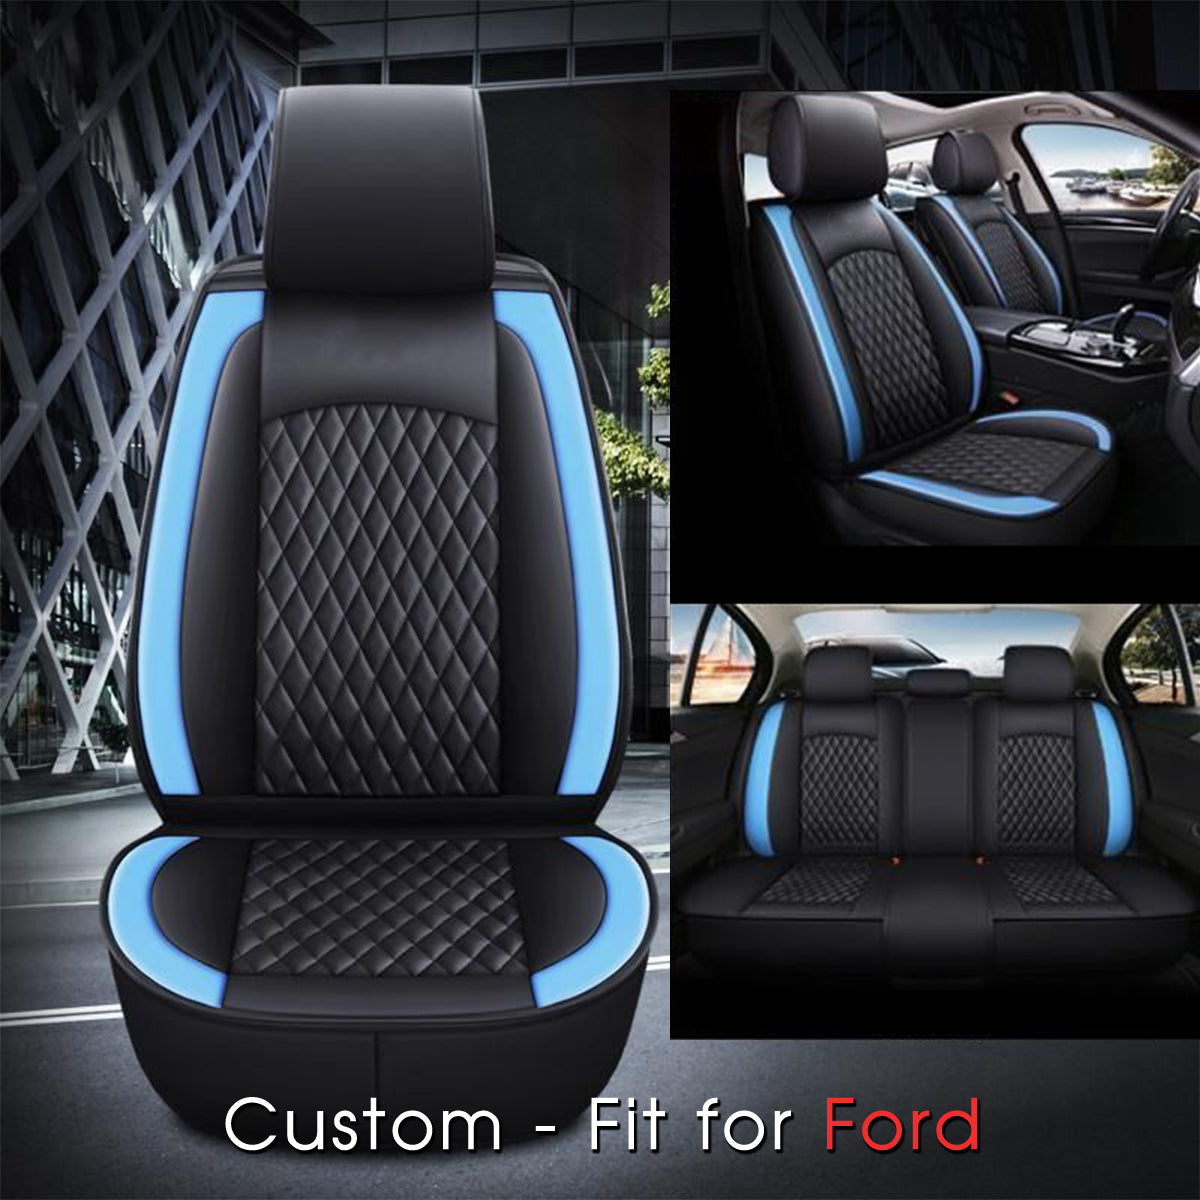 2 Car Seat Covers Full Set, Custom-Fit For Car, Waterproof Leather Front Rear Seat Automotive Protection Cushions, Car Accessories DLFD211